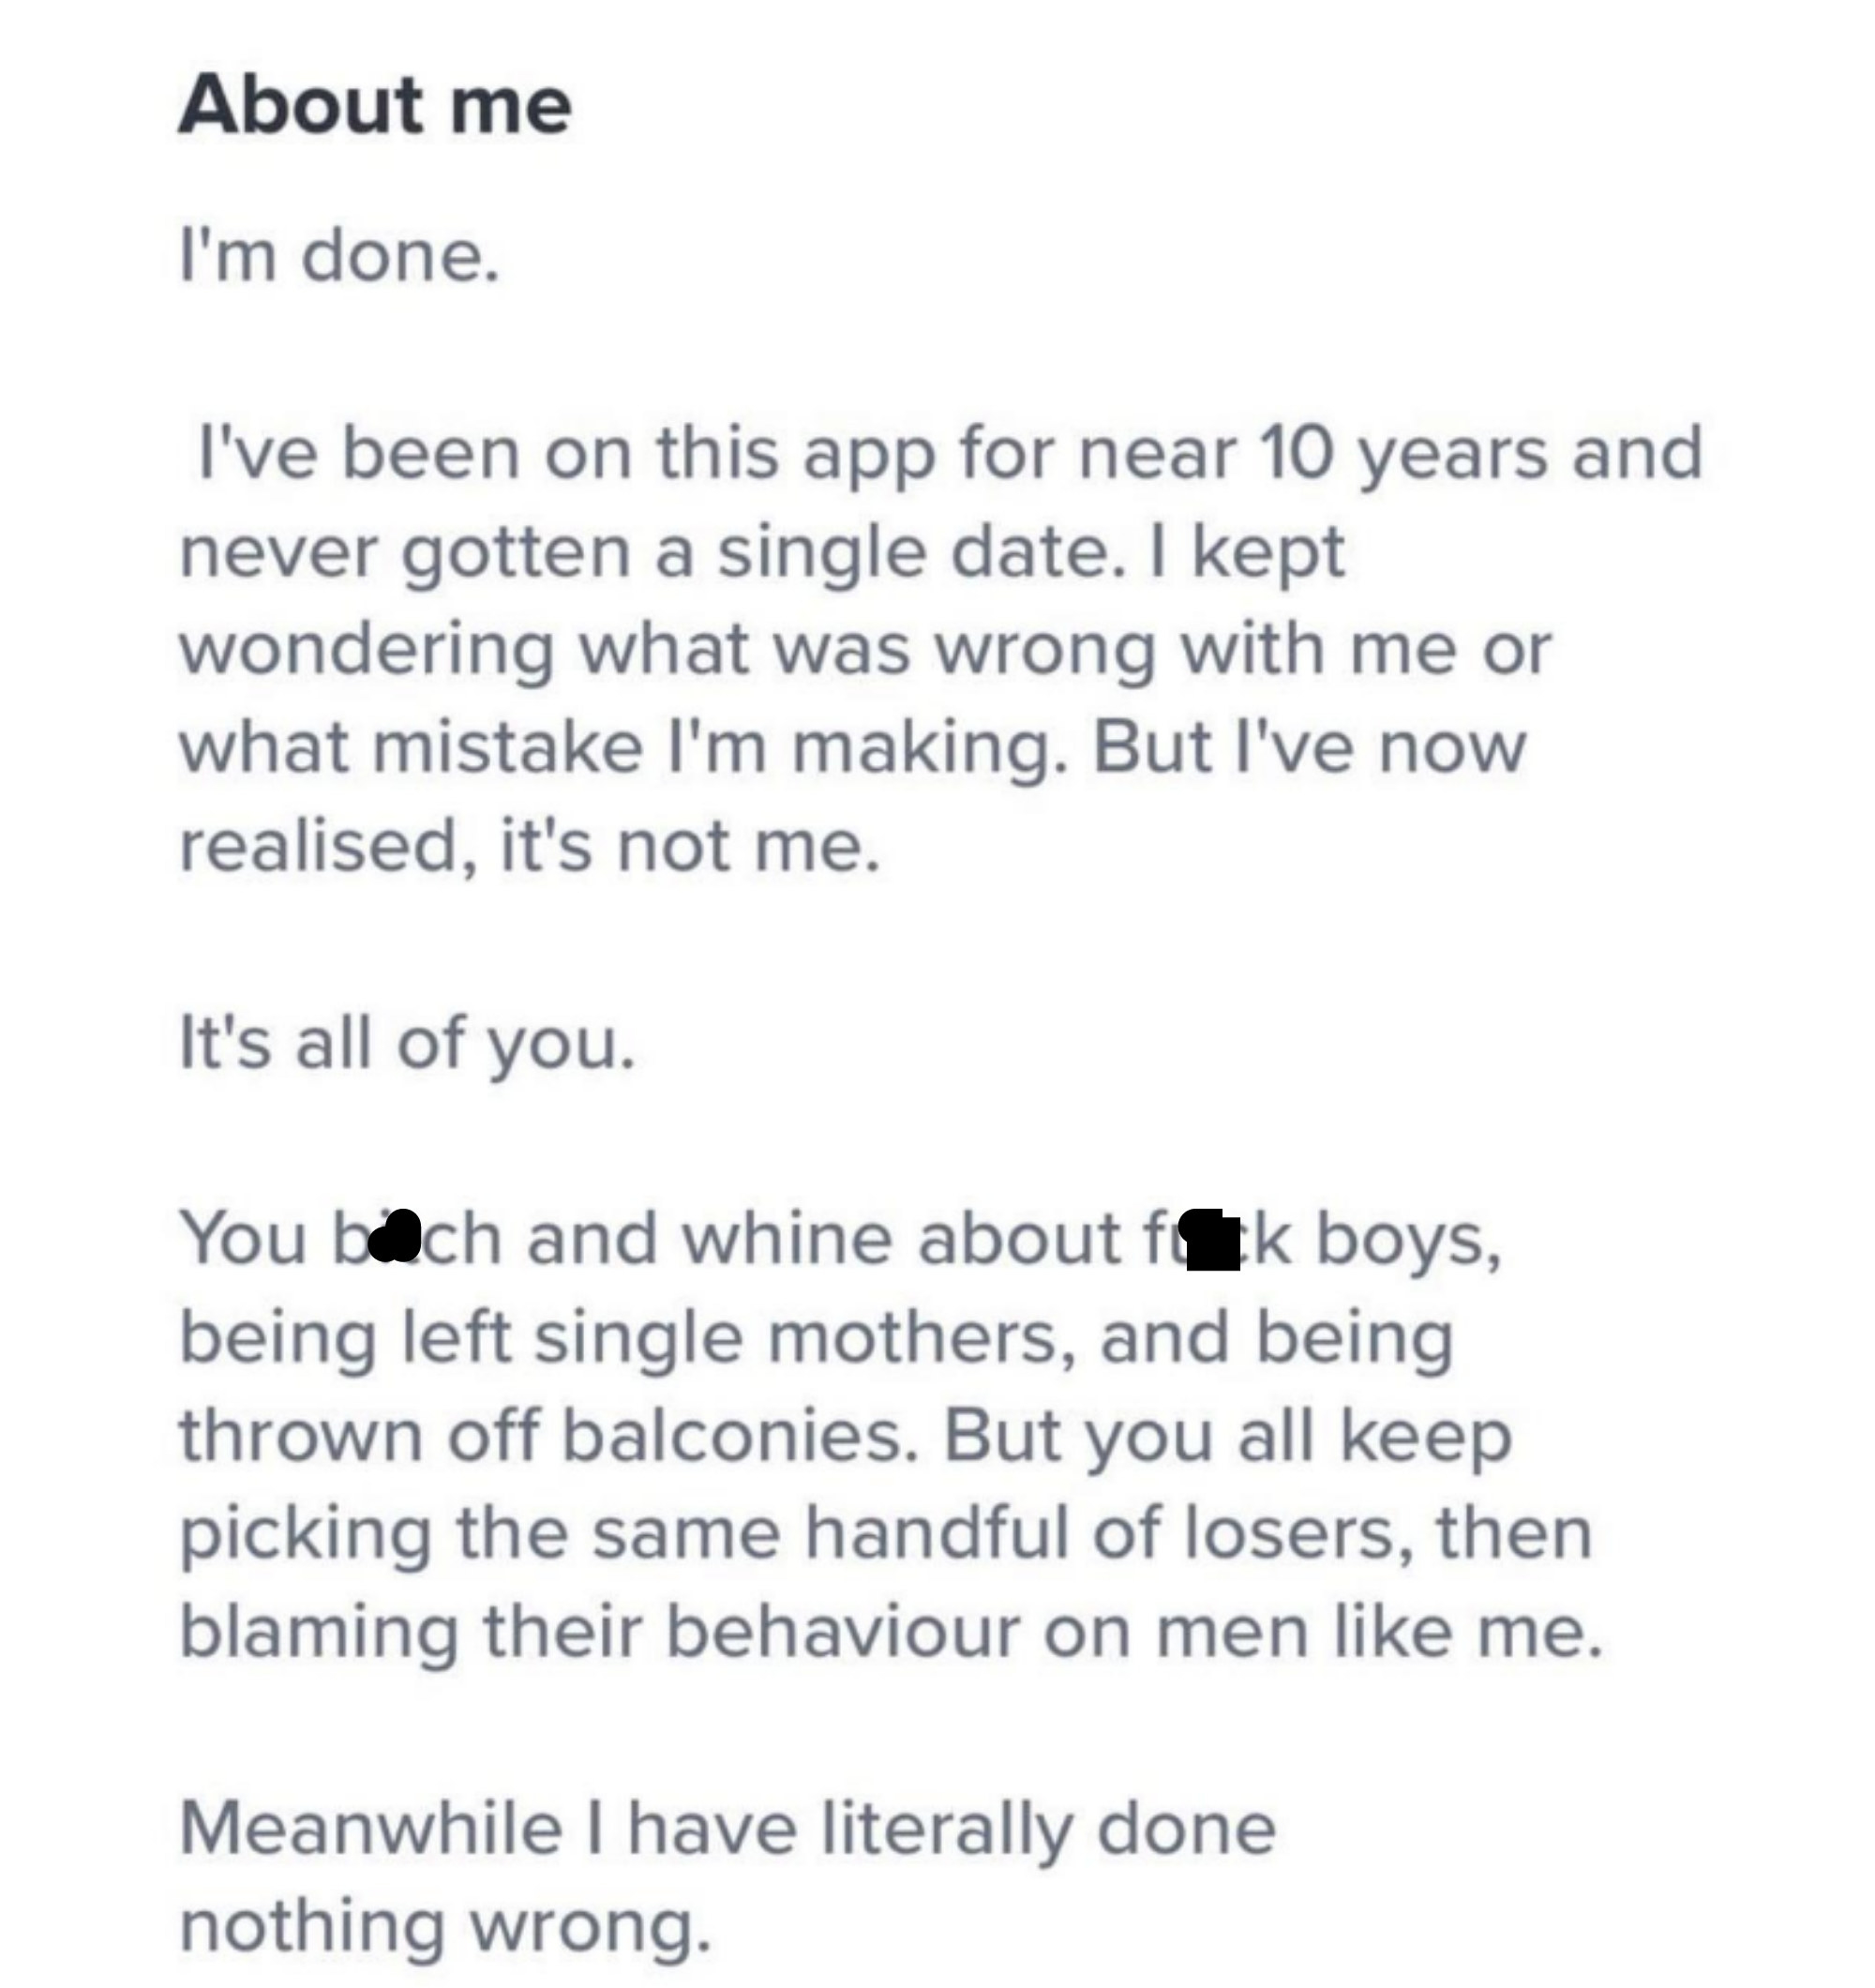 An About Me section in which a man says he&#x27;s done, that he&#x27;s had the app for 10 years and never gotten a single date, but it&#x27;s not him, it&#x27;s all of the women who choose losers